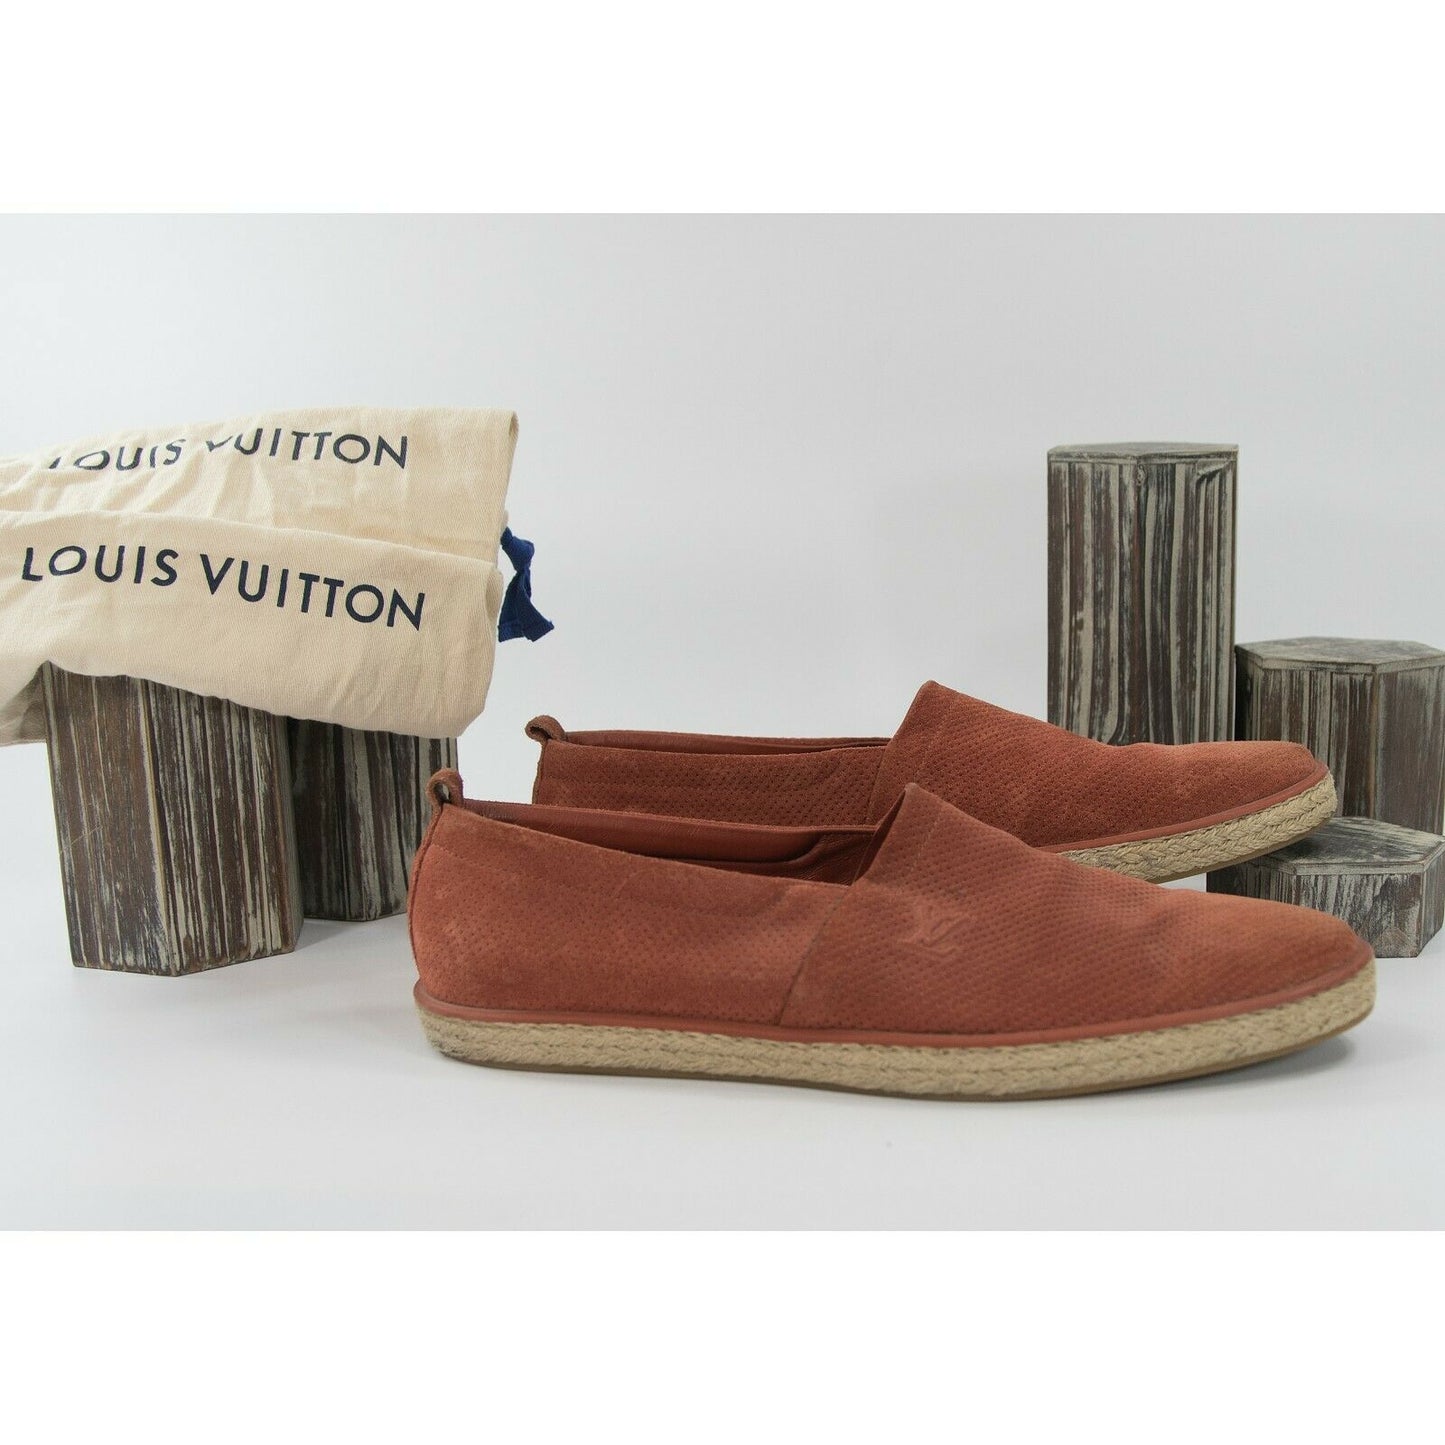 Louis Vuitton Rust Perforated Suede Mens Vintage Driving Moccasin Size 10.5